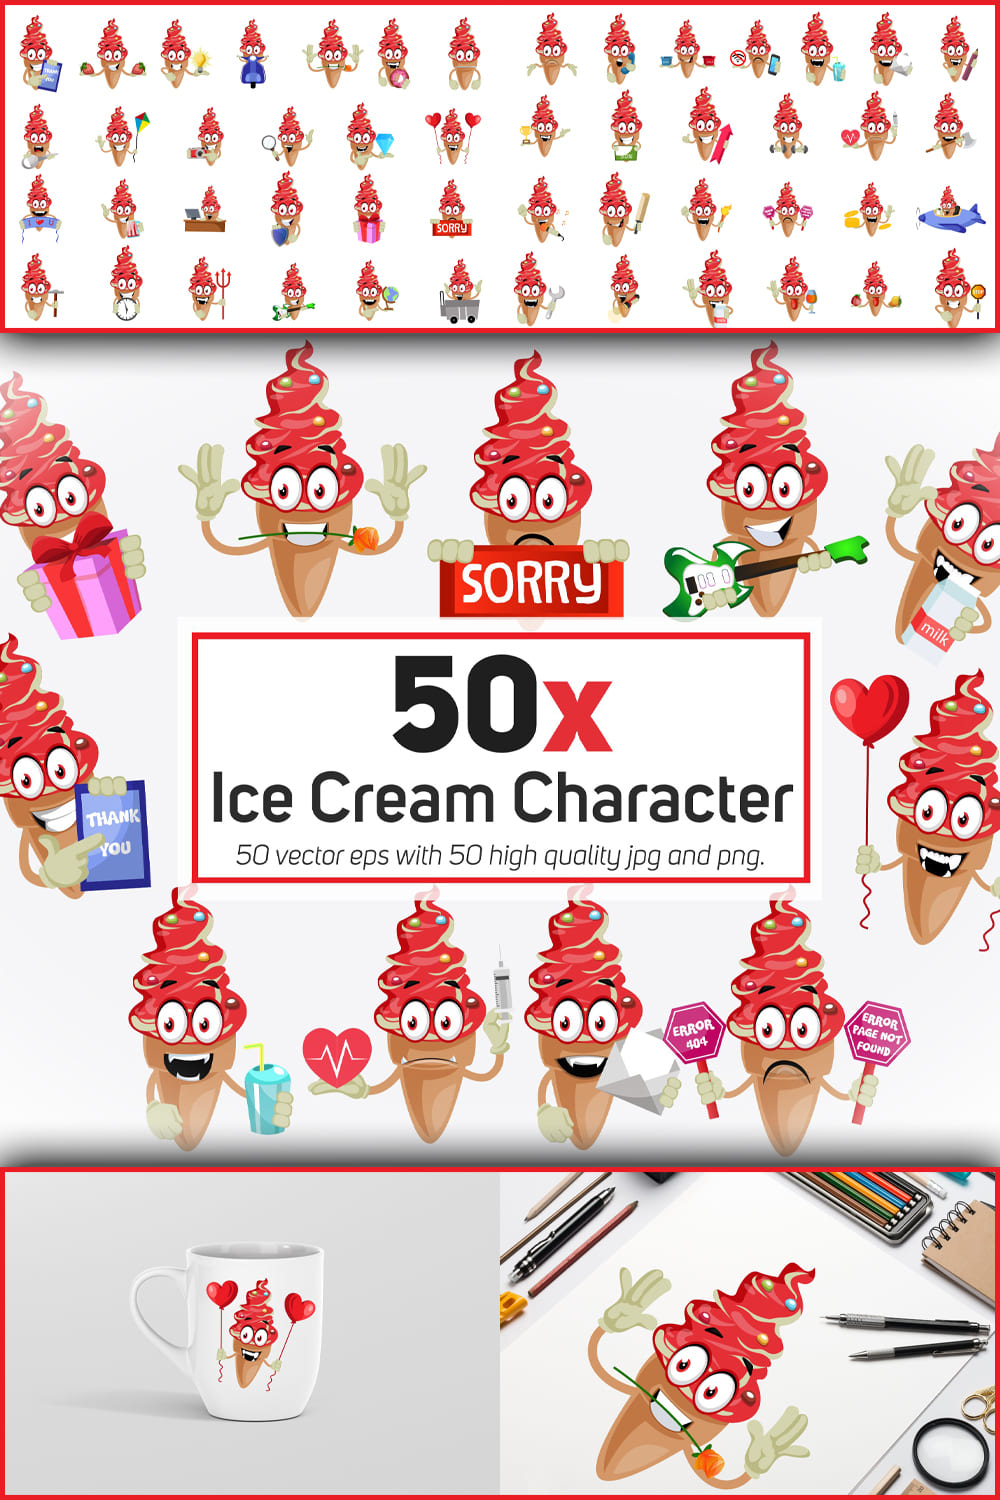 541783 50x ice cream character collection illustration pinterest 1000 1500 732